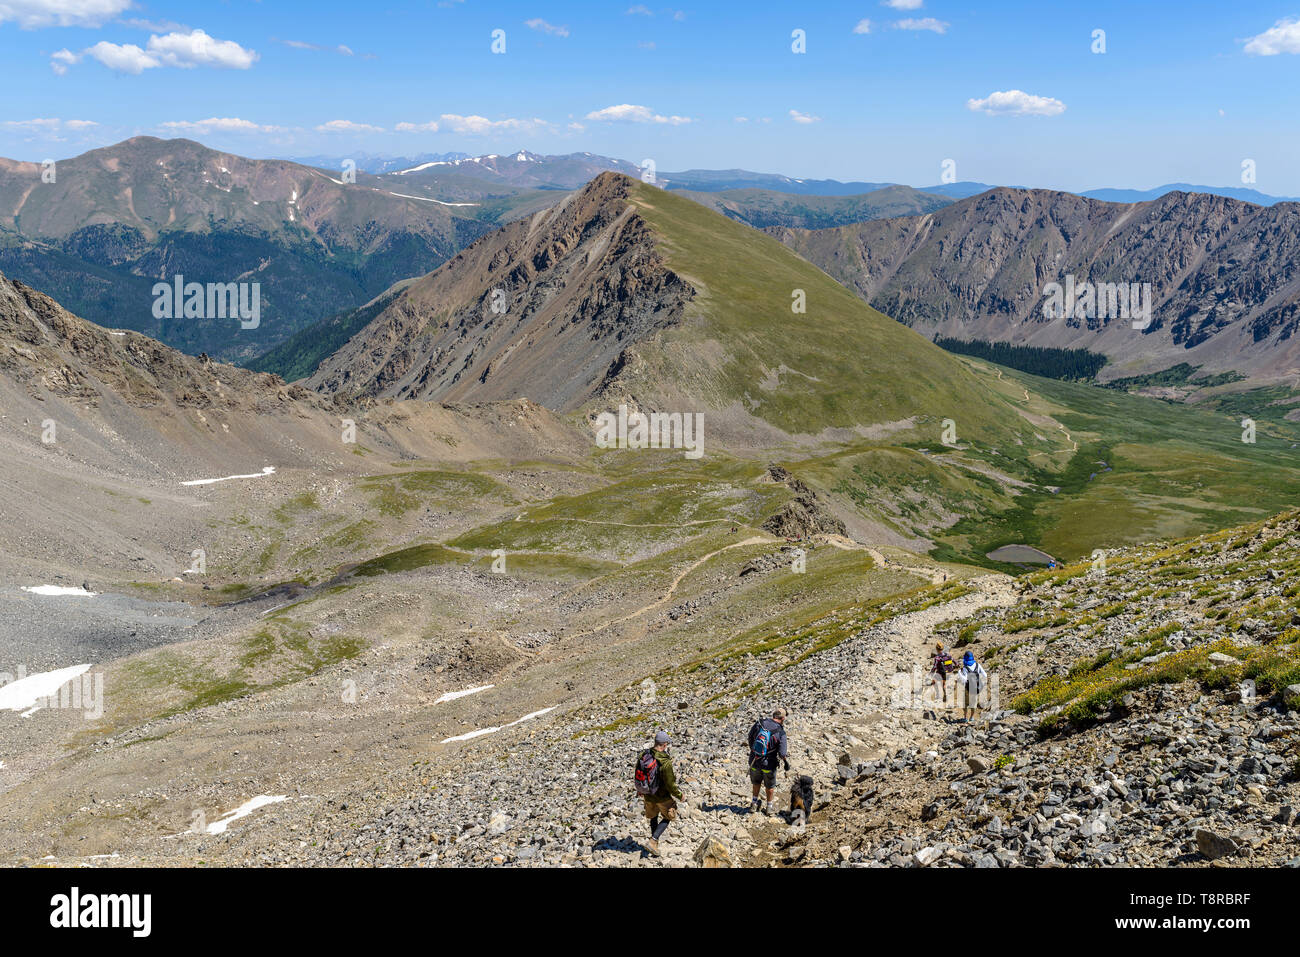 Summer Mountain Hiking Trail - Hikers on a rocky and steep trail at base of Grays Peak in Front Range of Colorado Rockies, USA. Stock Photo